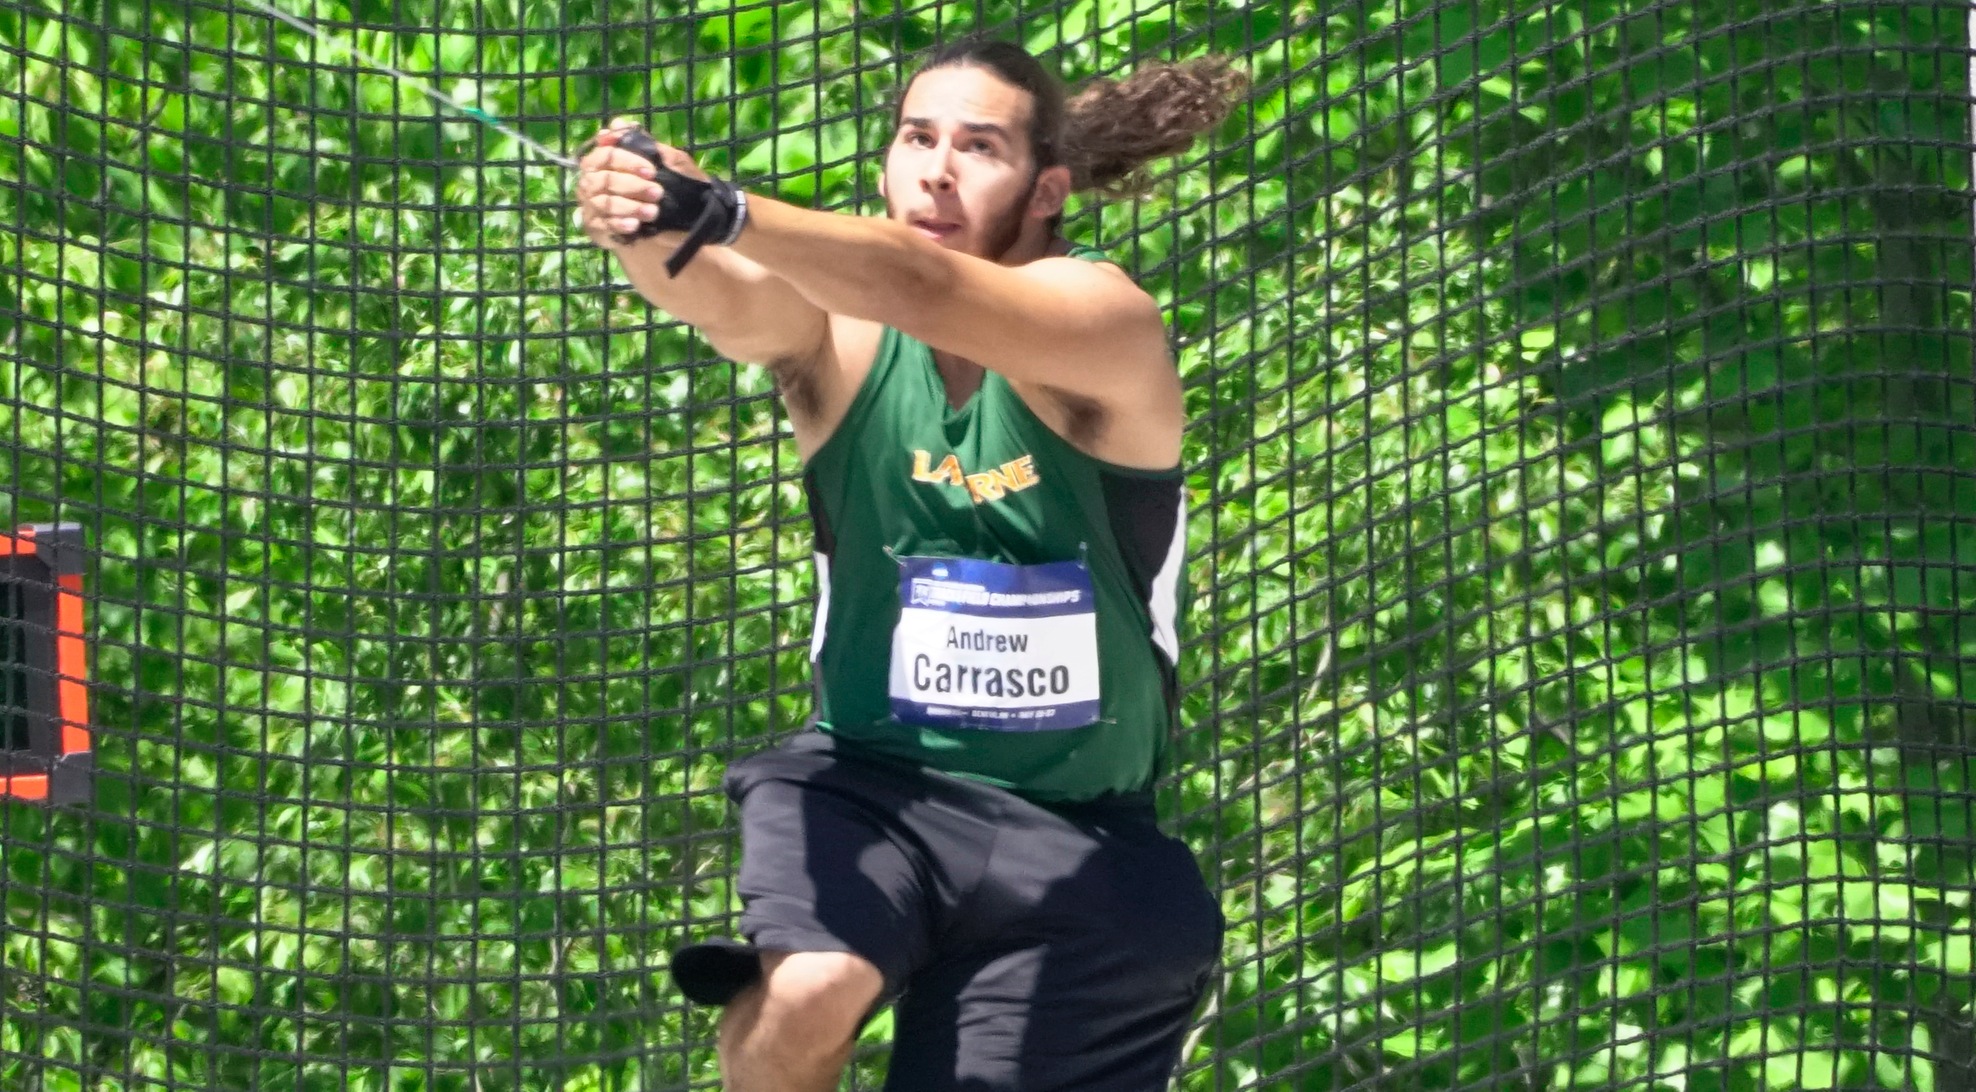 Carrasco finishes fifth in hammer, earns back-to-back All-America status